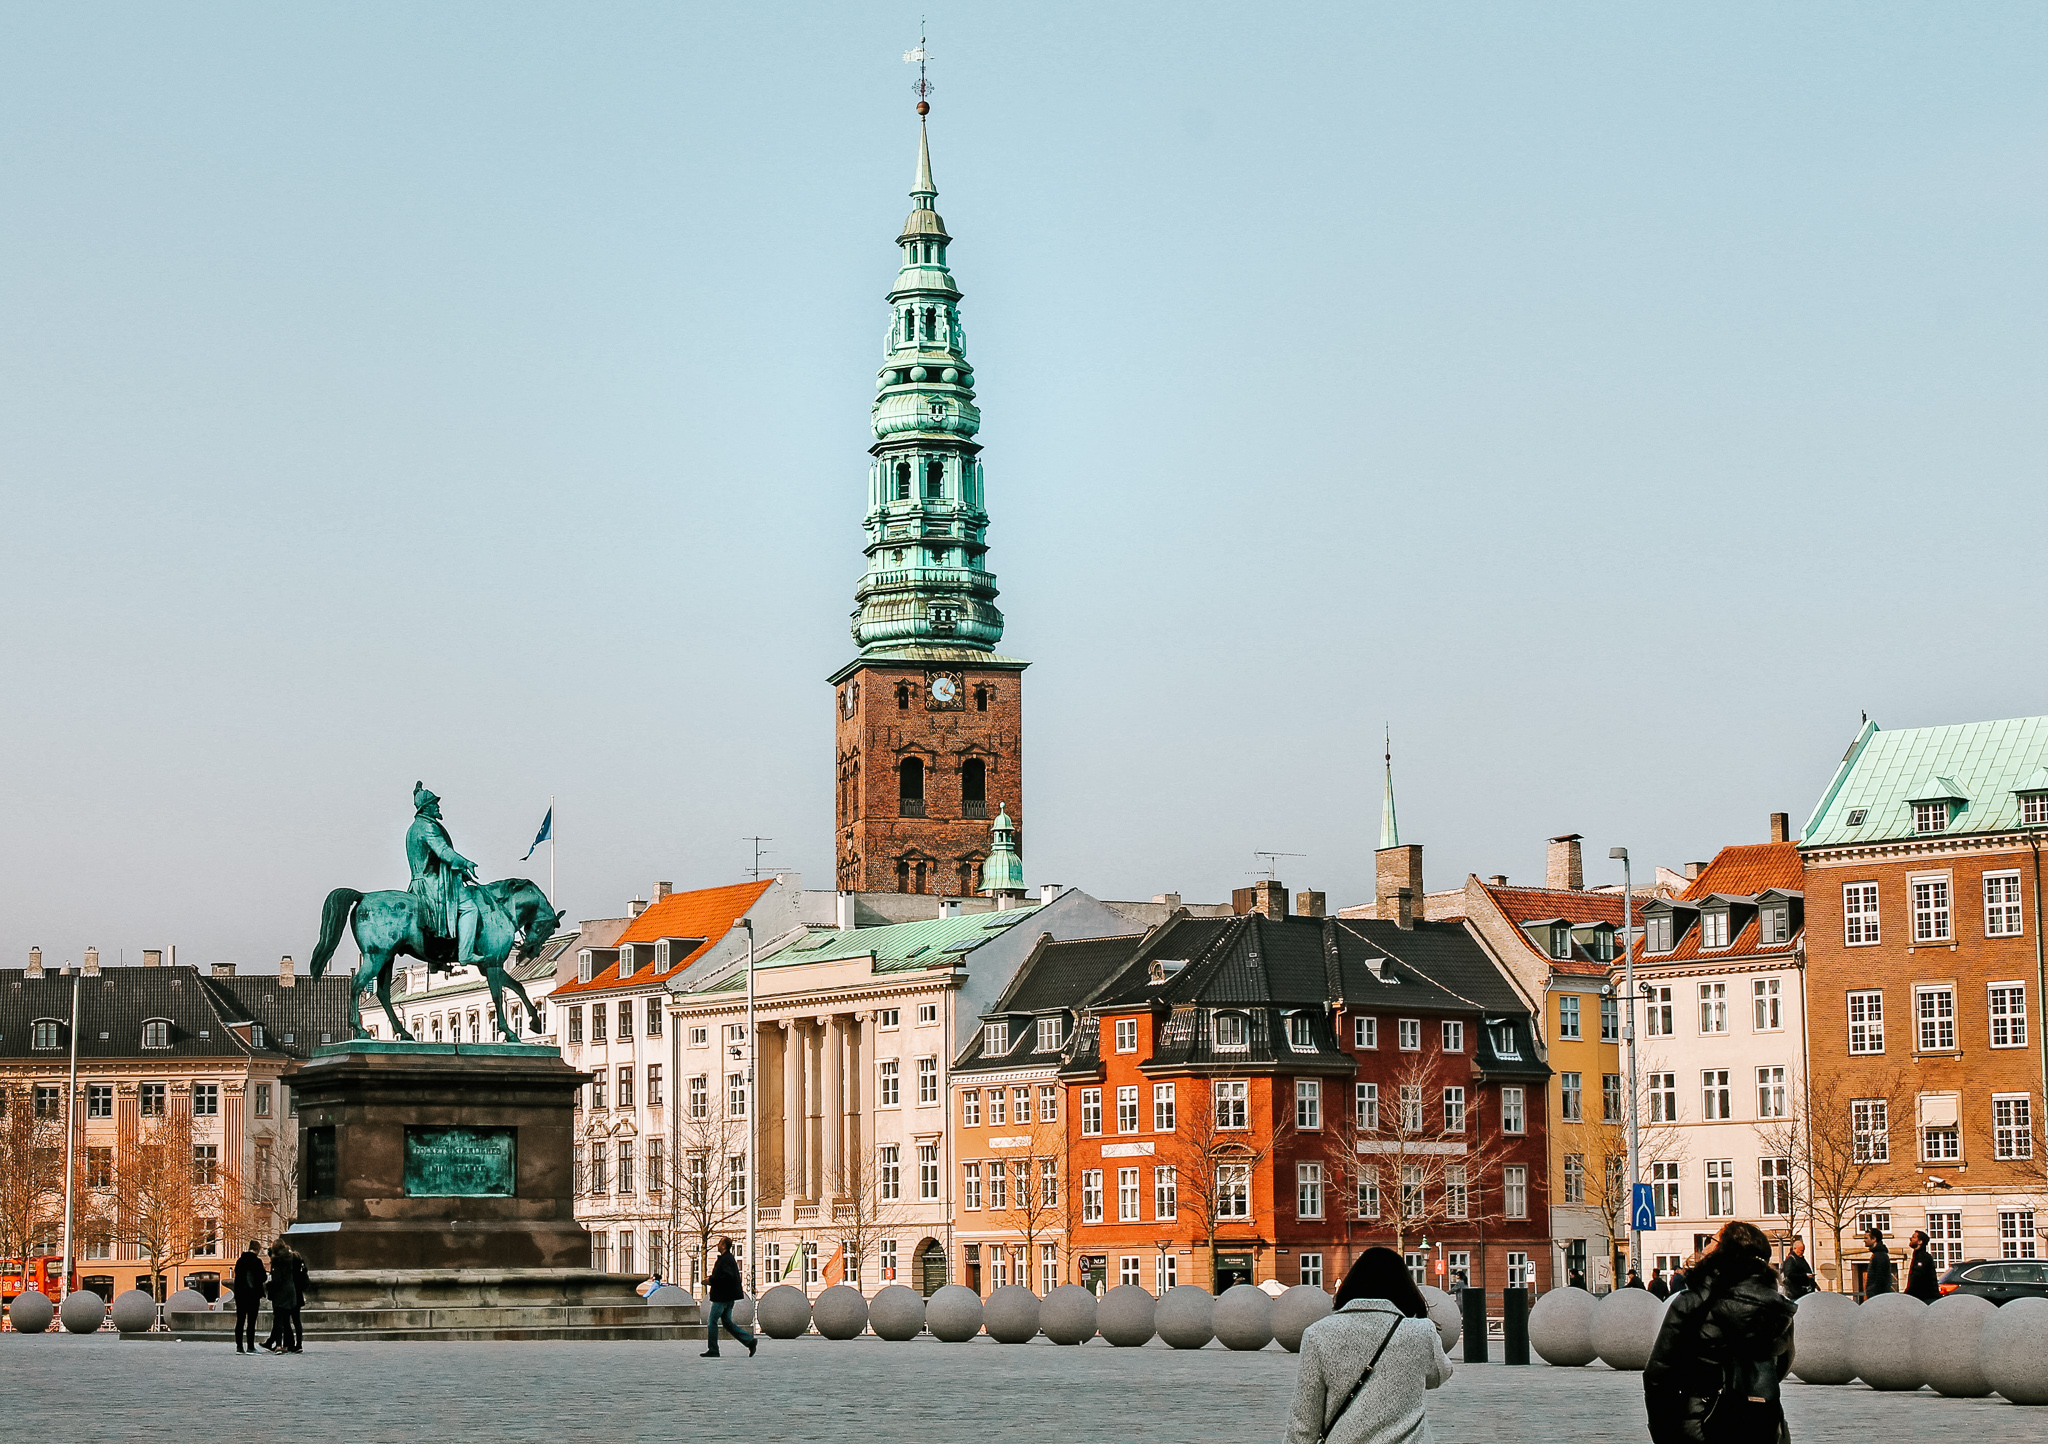 Christiansborg Palace's green, copper tower above colorful buildings in a square in Copenhagen.